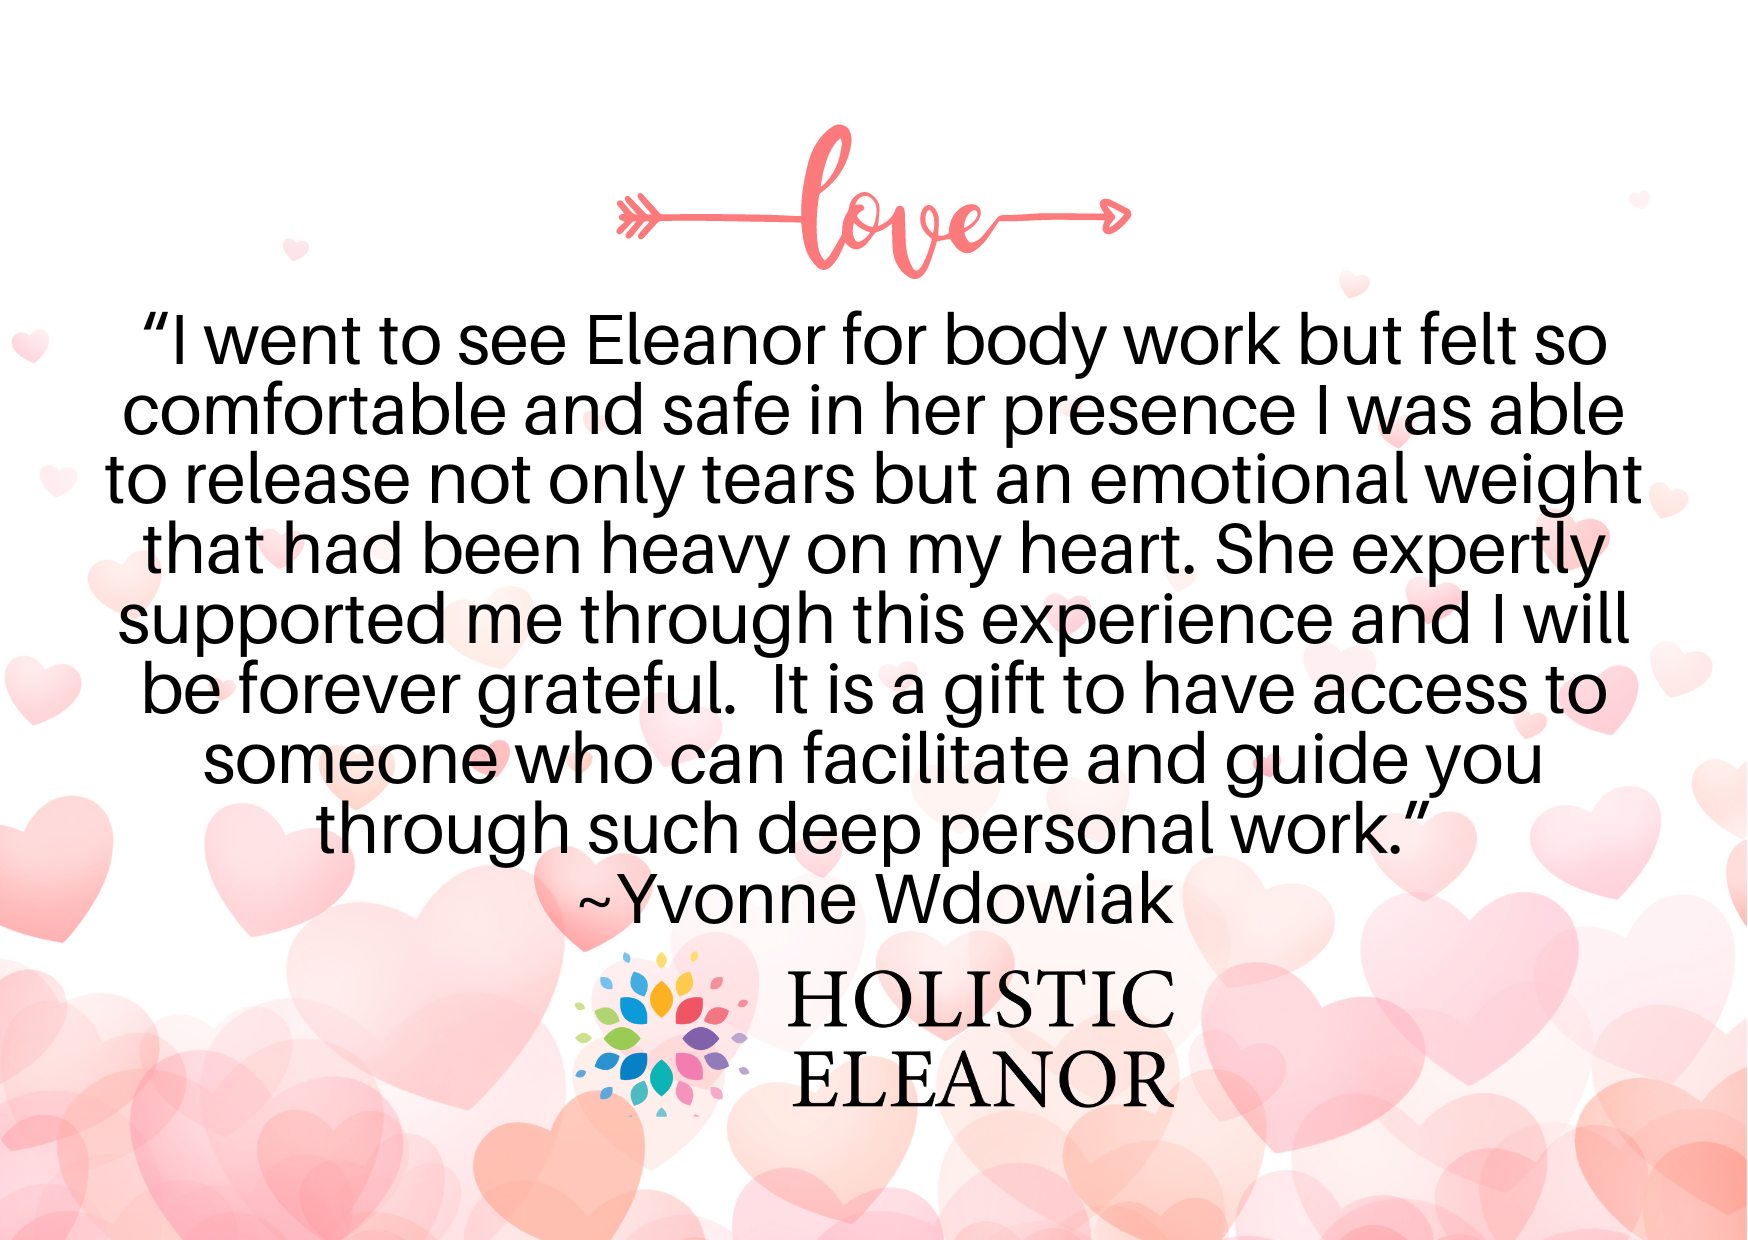 Client Testimonial Yvonne Wdowiak 3 weeks ago 5 stars to Google Business Reviews "I went to see Eleanor for body work but felt so comfortable and safe in her presence I was able to release not only tears but an emotional weight that had been heavy on my heart. She expertly supported me through this experience and I will be forever grateful. It is a gift to have access to someone who can facilitate and guide you through such deep personal work." Meme by Holistic Eleanor